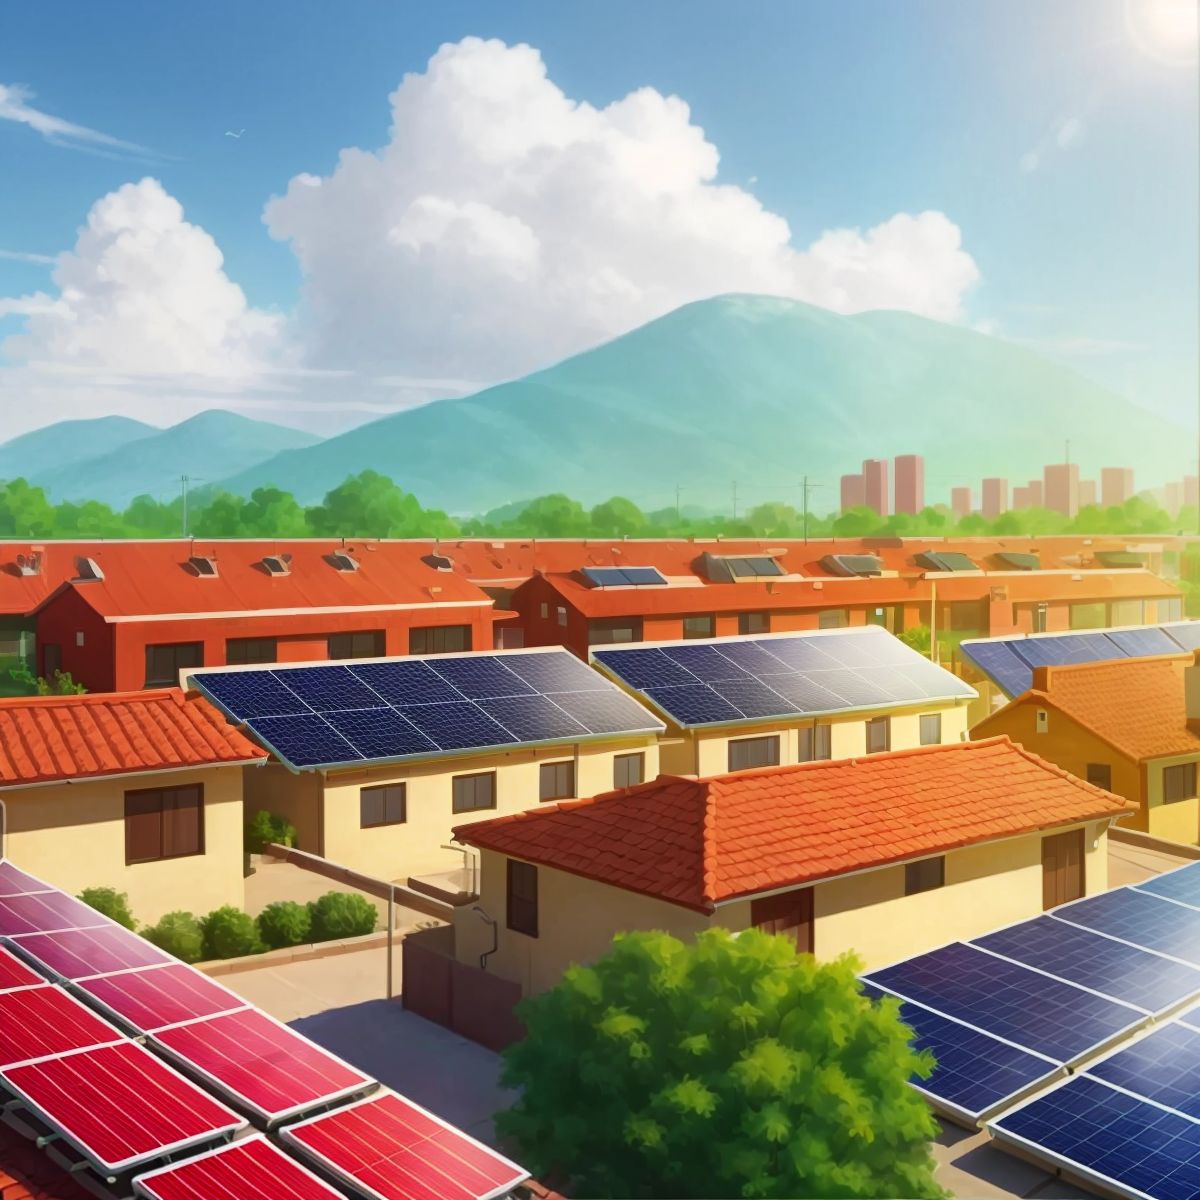 A vibrant community scene with solar panel installations and clean air, with no specific character in focus